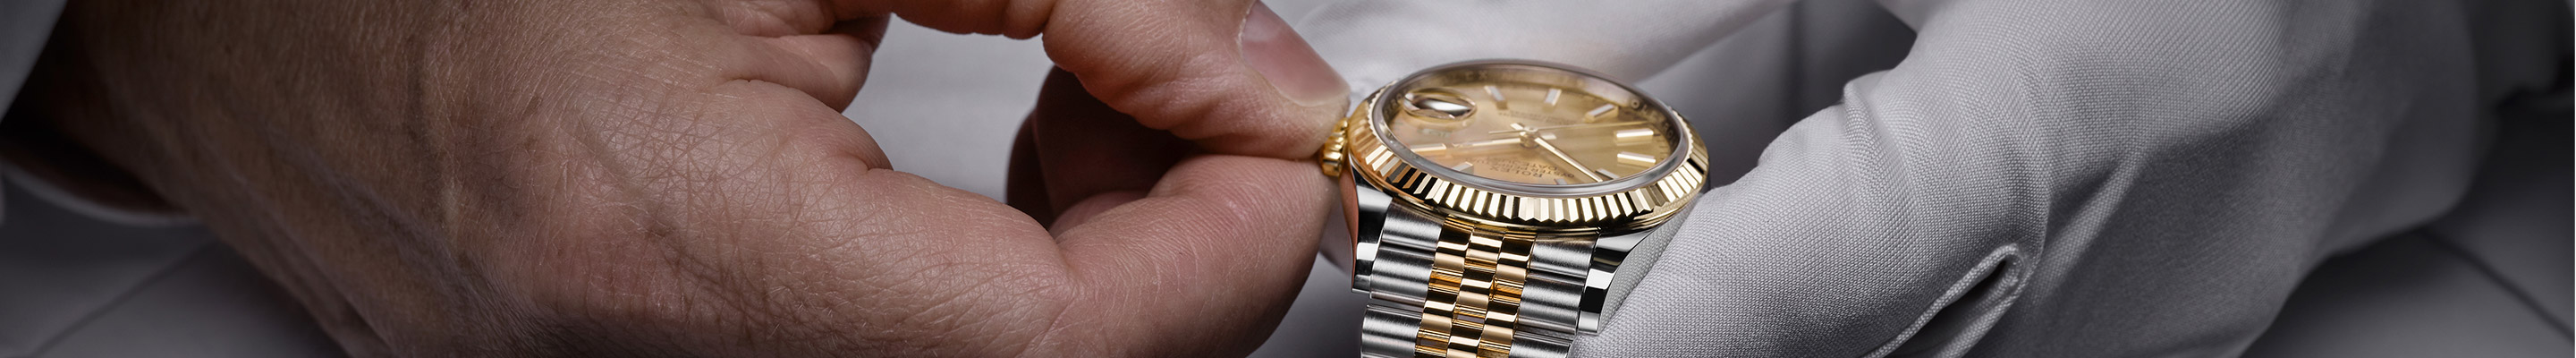 Rolex Watch Servicing and Repair at fourtane